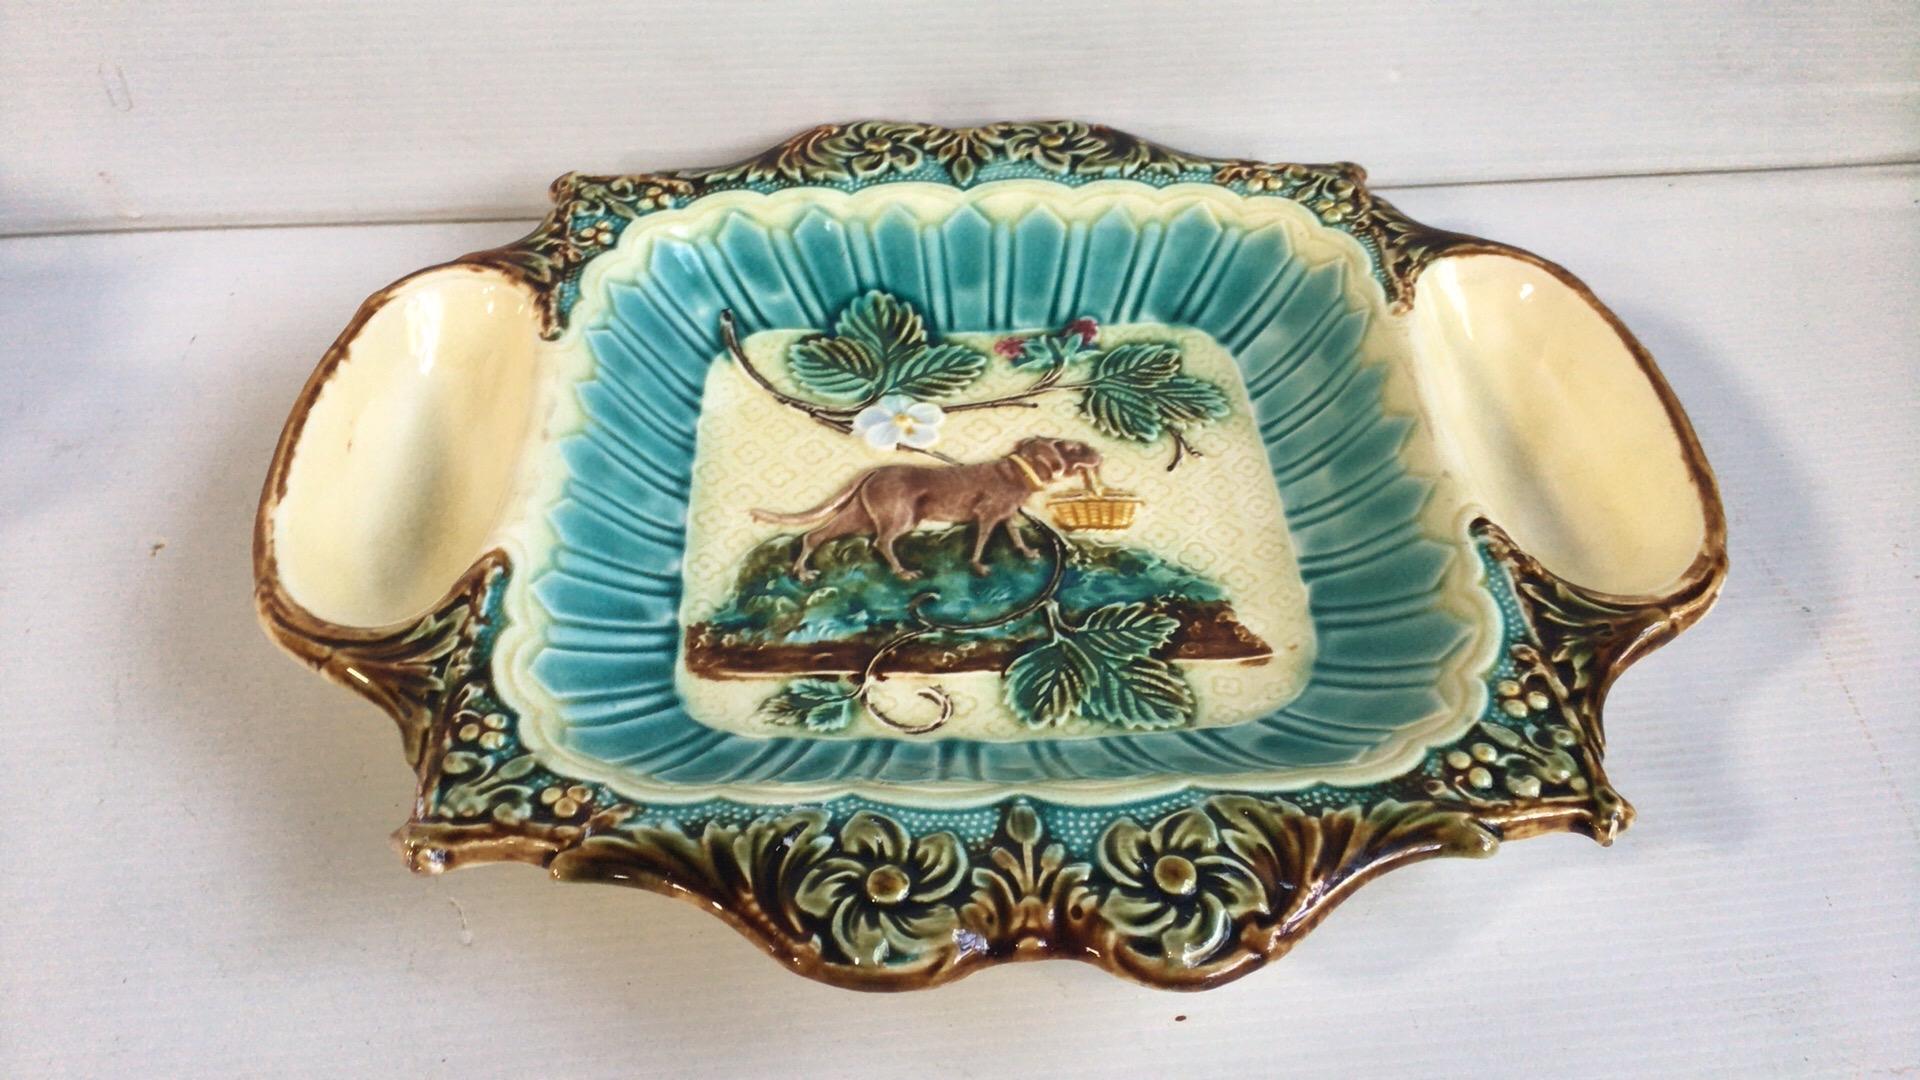 Unusual French Majolica strawberry server with cream and sugar spaces, circa 1890, attributed to Onnaing.
Sophistiqued leaves border, the center is decorated with strawberries and a dog holding a basket.
 
    